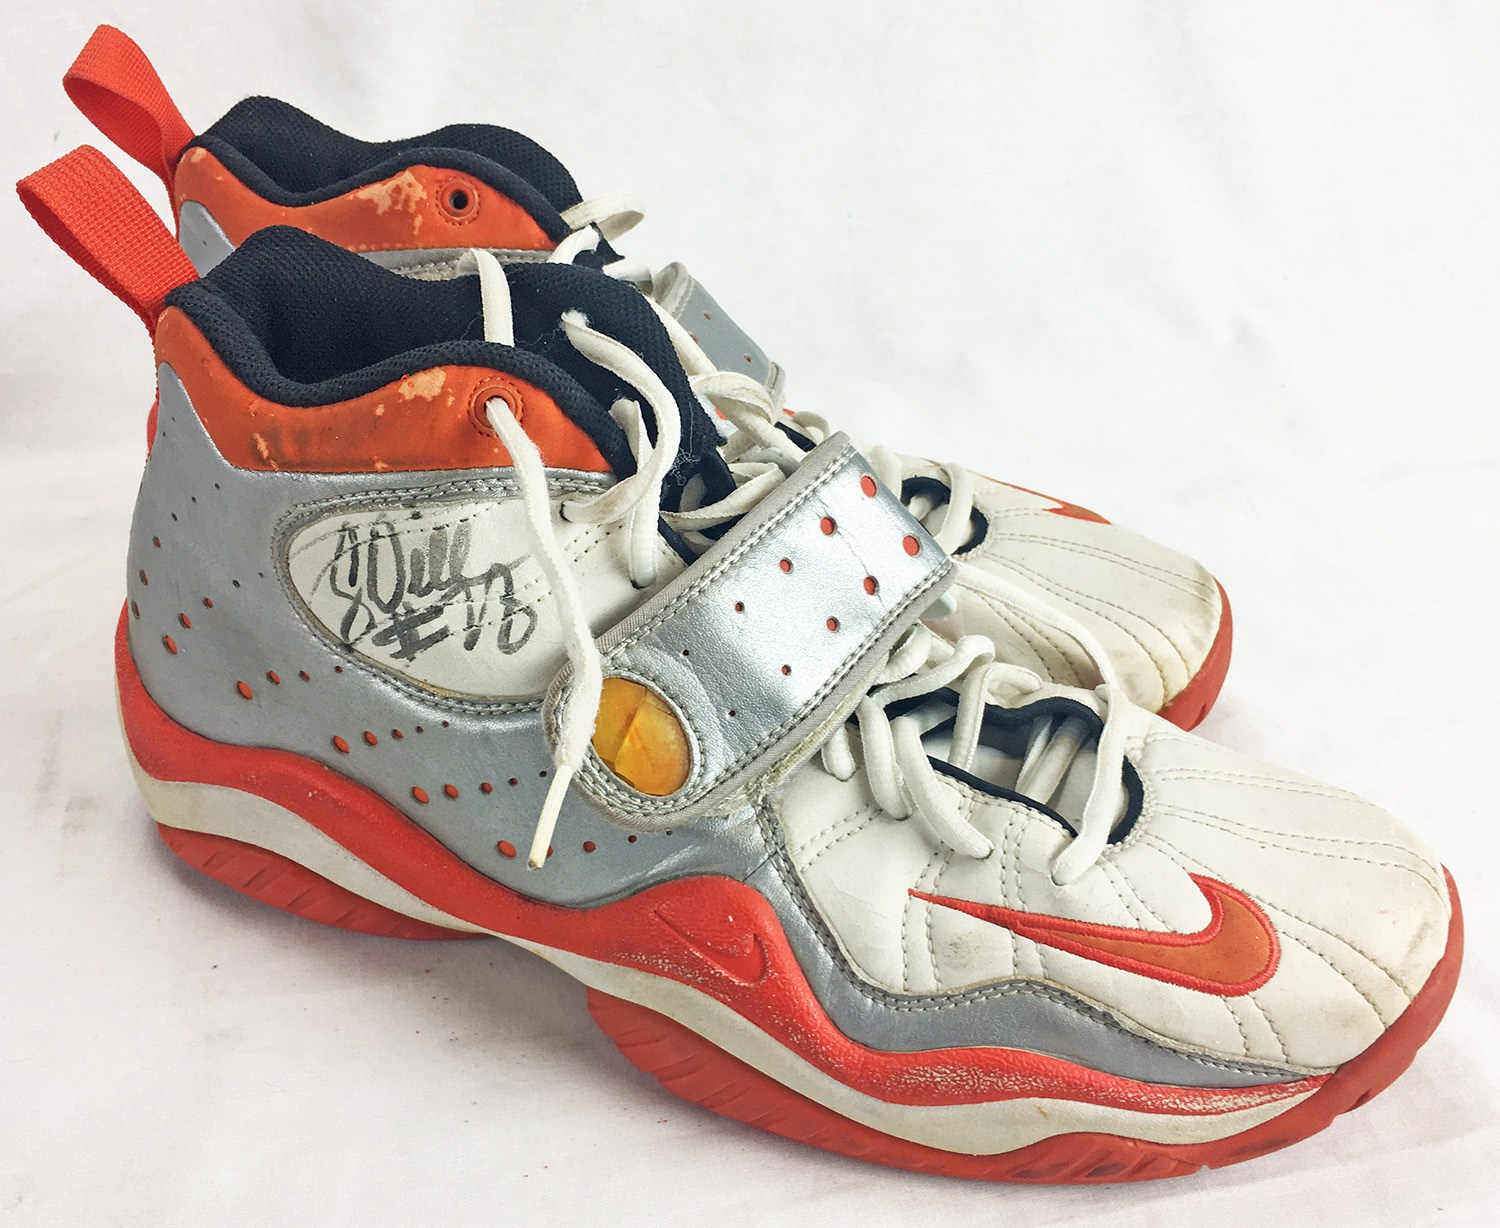 - Corey Dillon Signed Game Worn Cleats